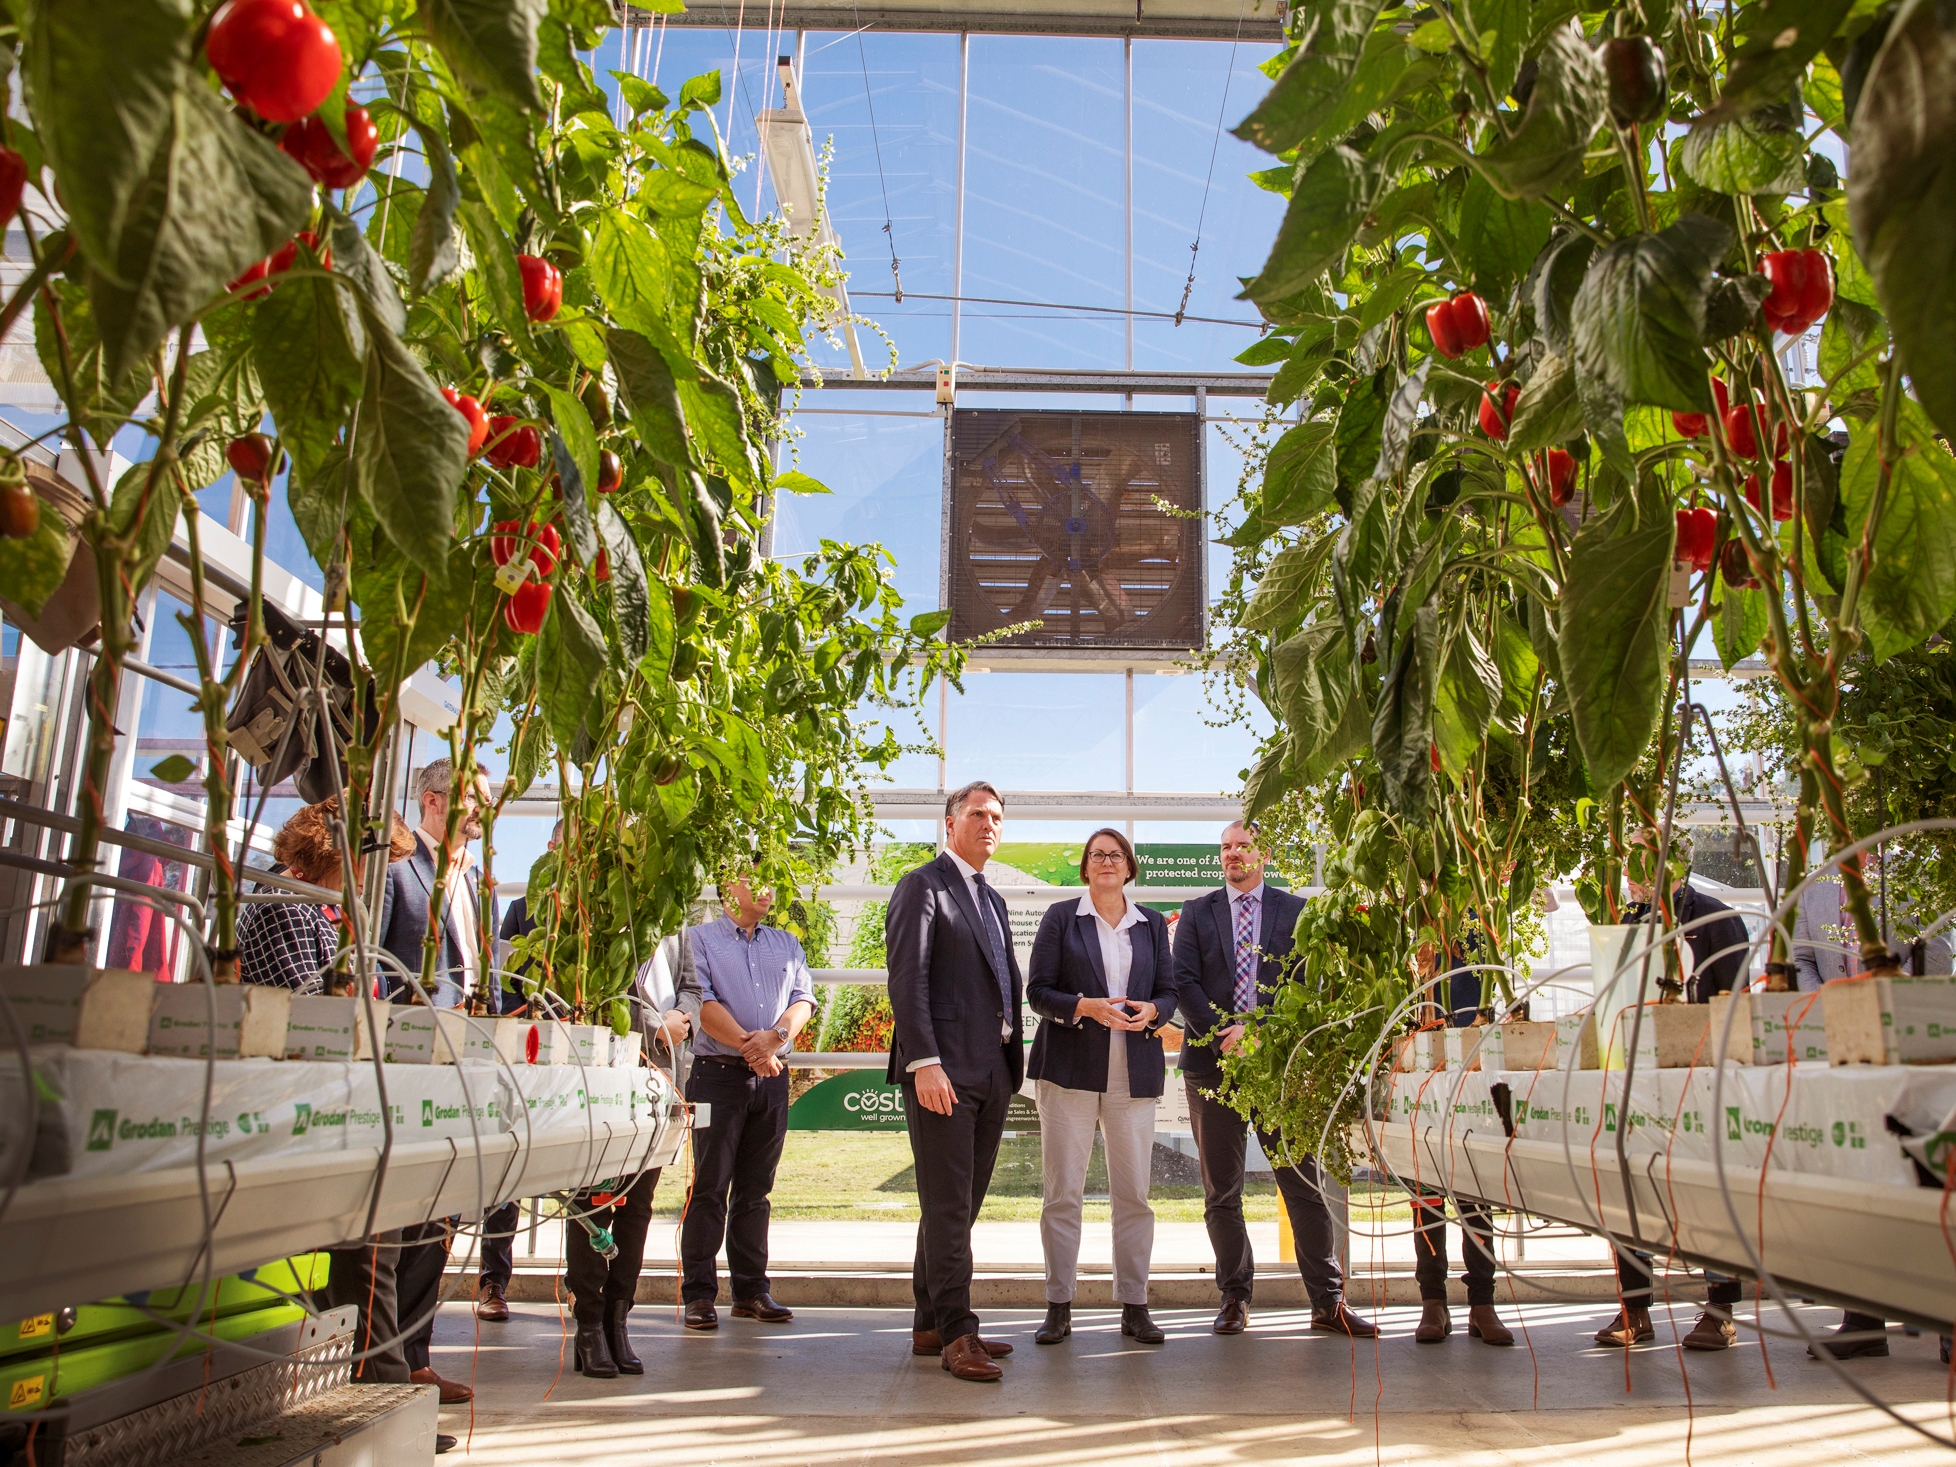 Federal Labor has promised to fund one-third of WSU’s $50m Agri Tech Hub, which is set to become the nation’s first high-tech commercial, teaching and research greenhouse complex.